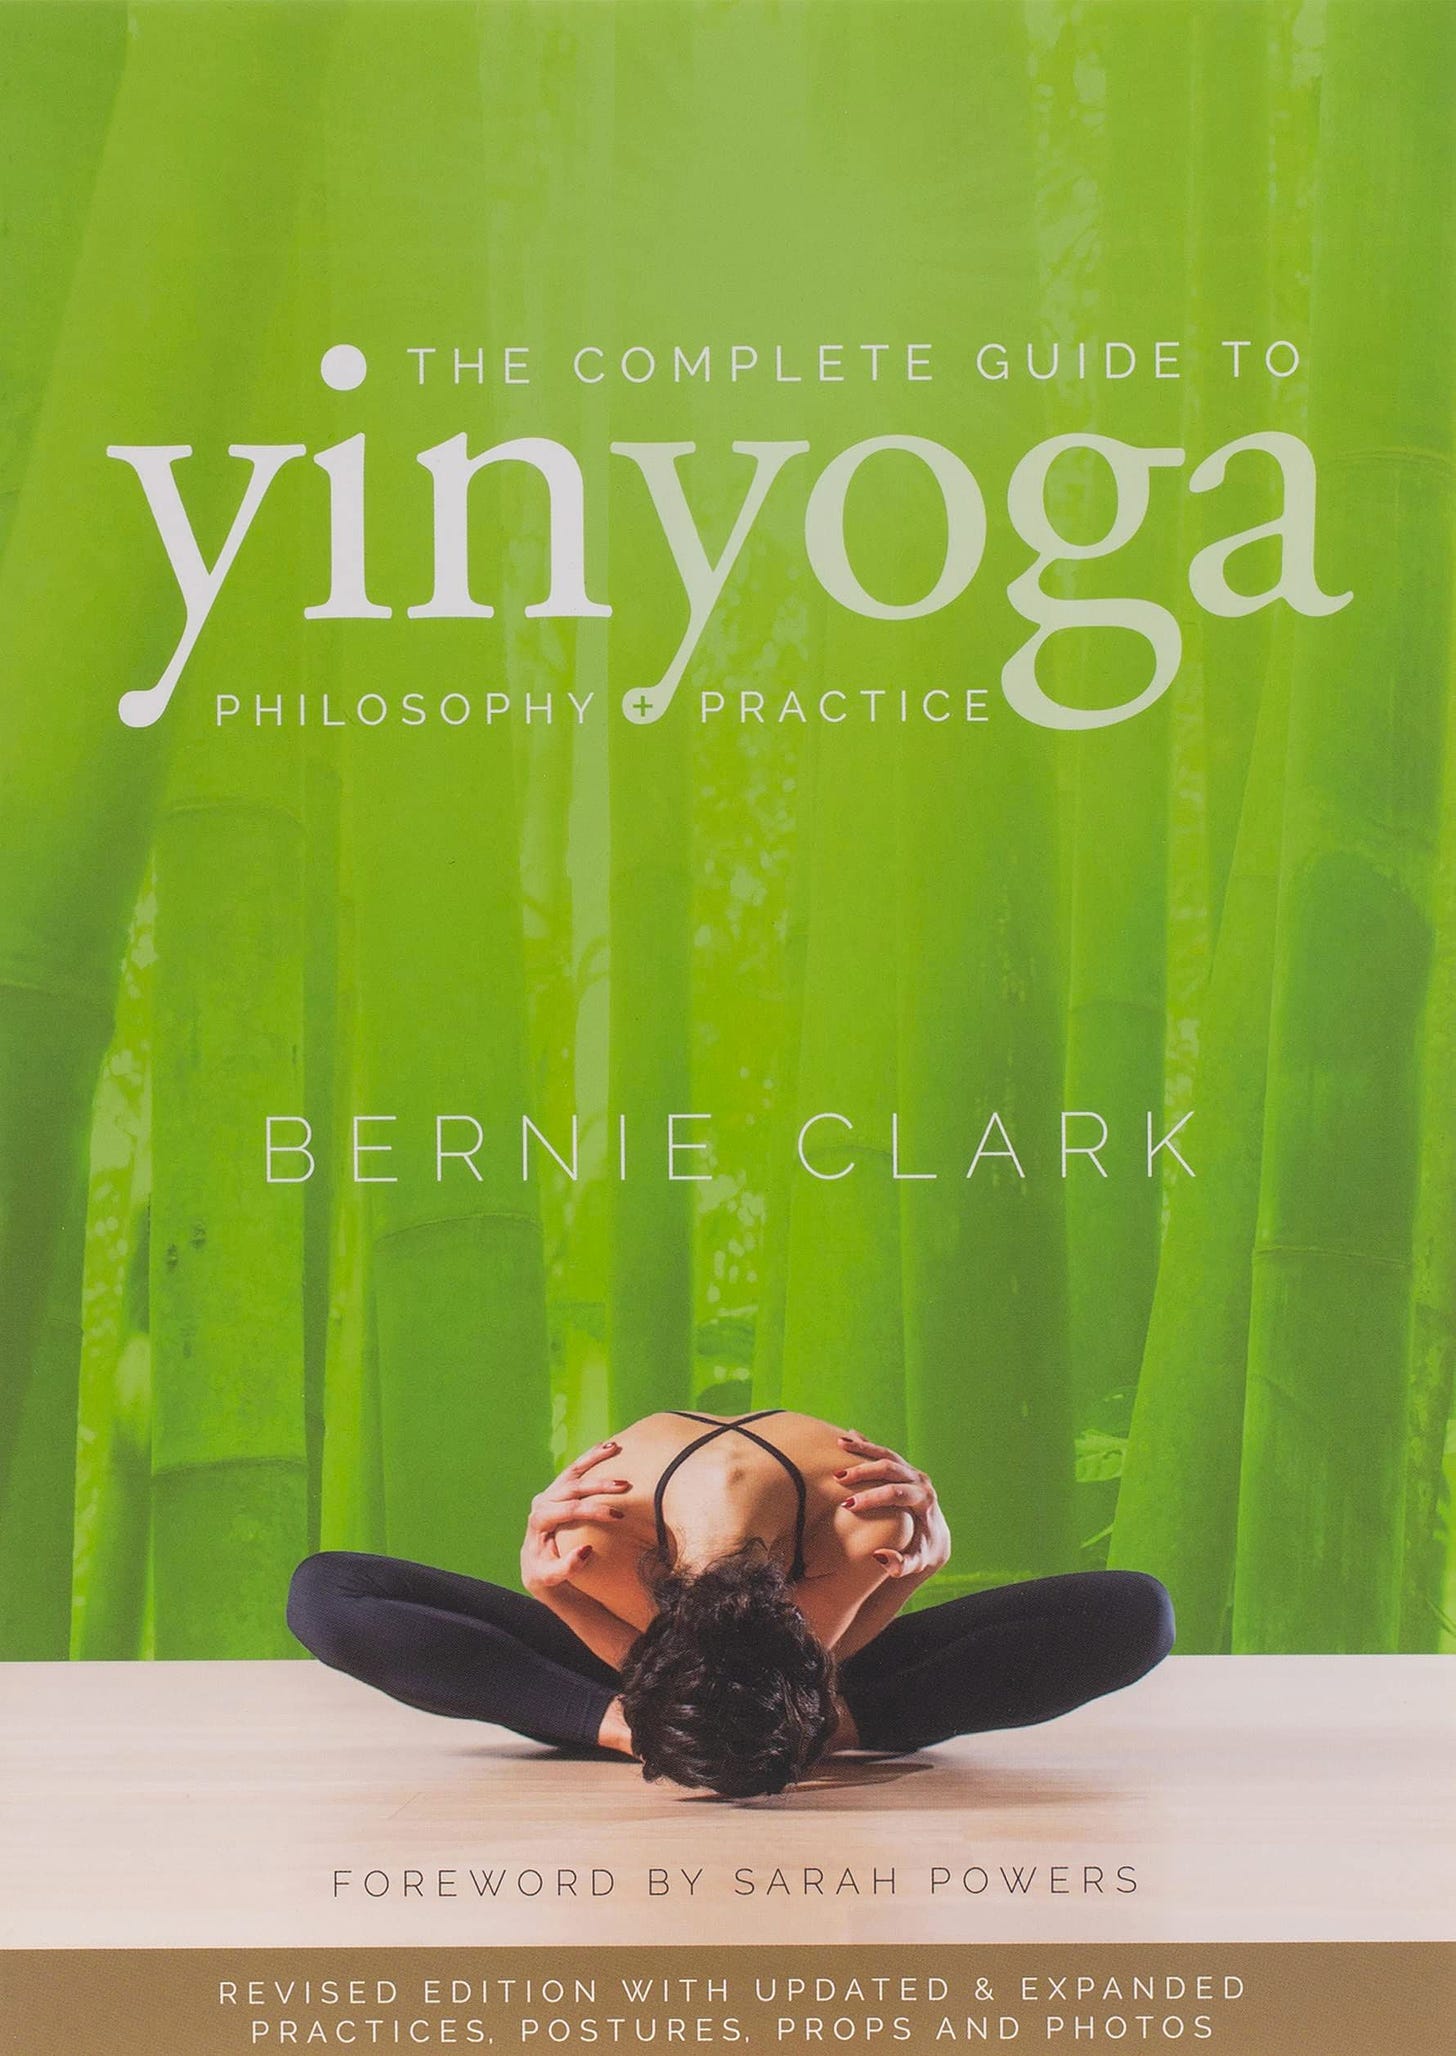 “The Complete Guide to Yin Yoga’ by Bernie Clark